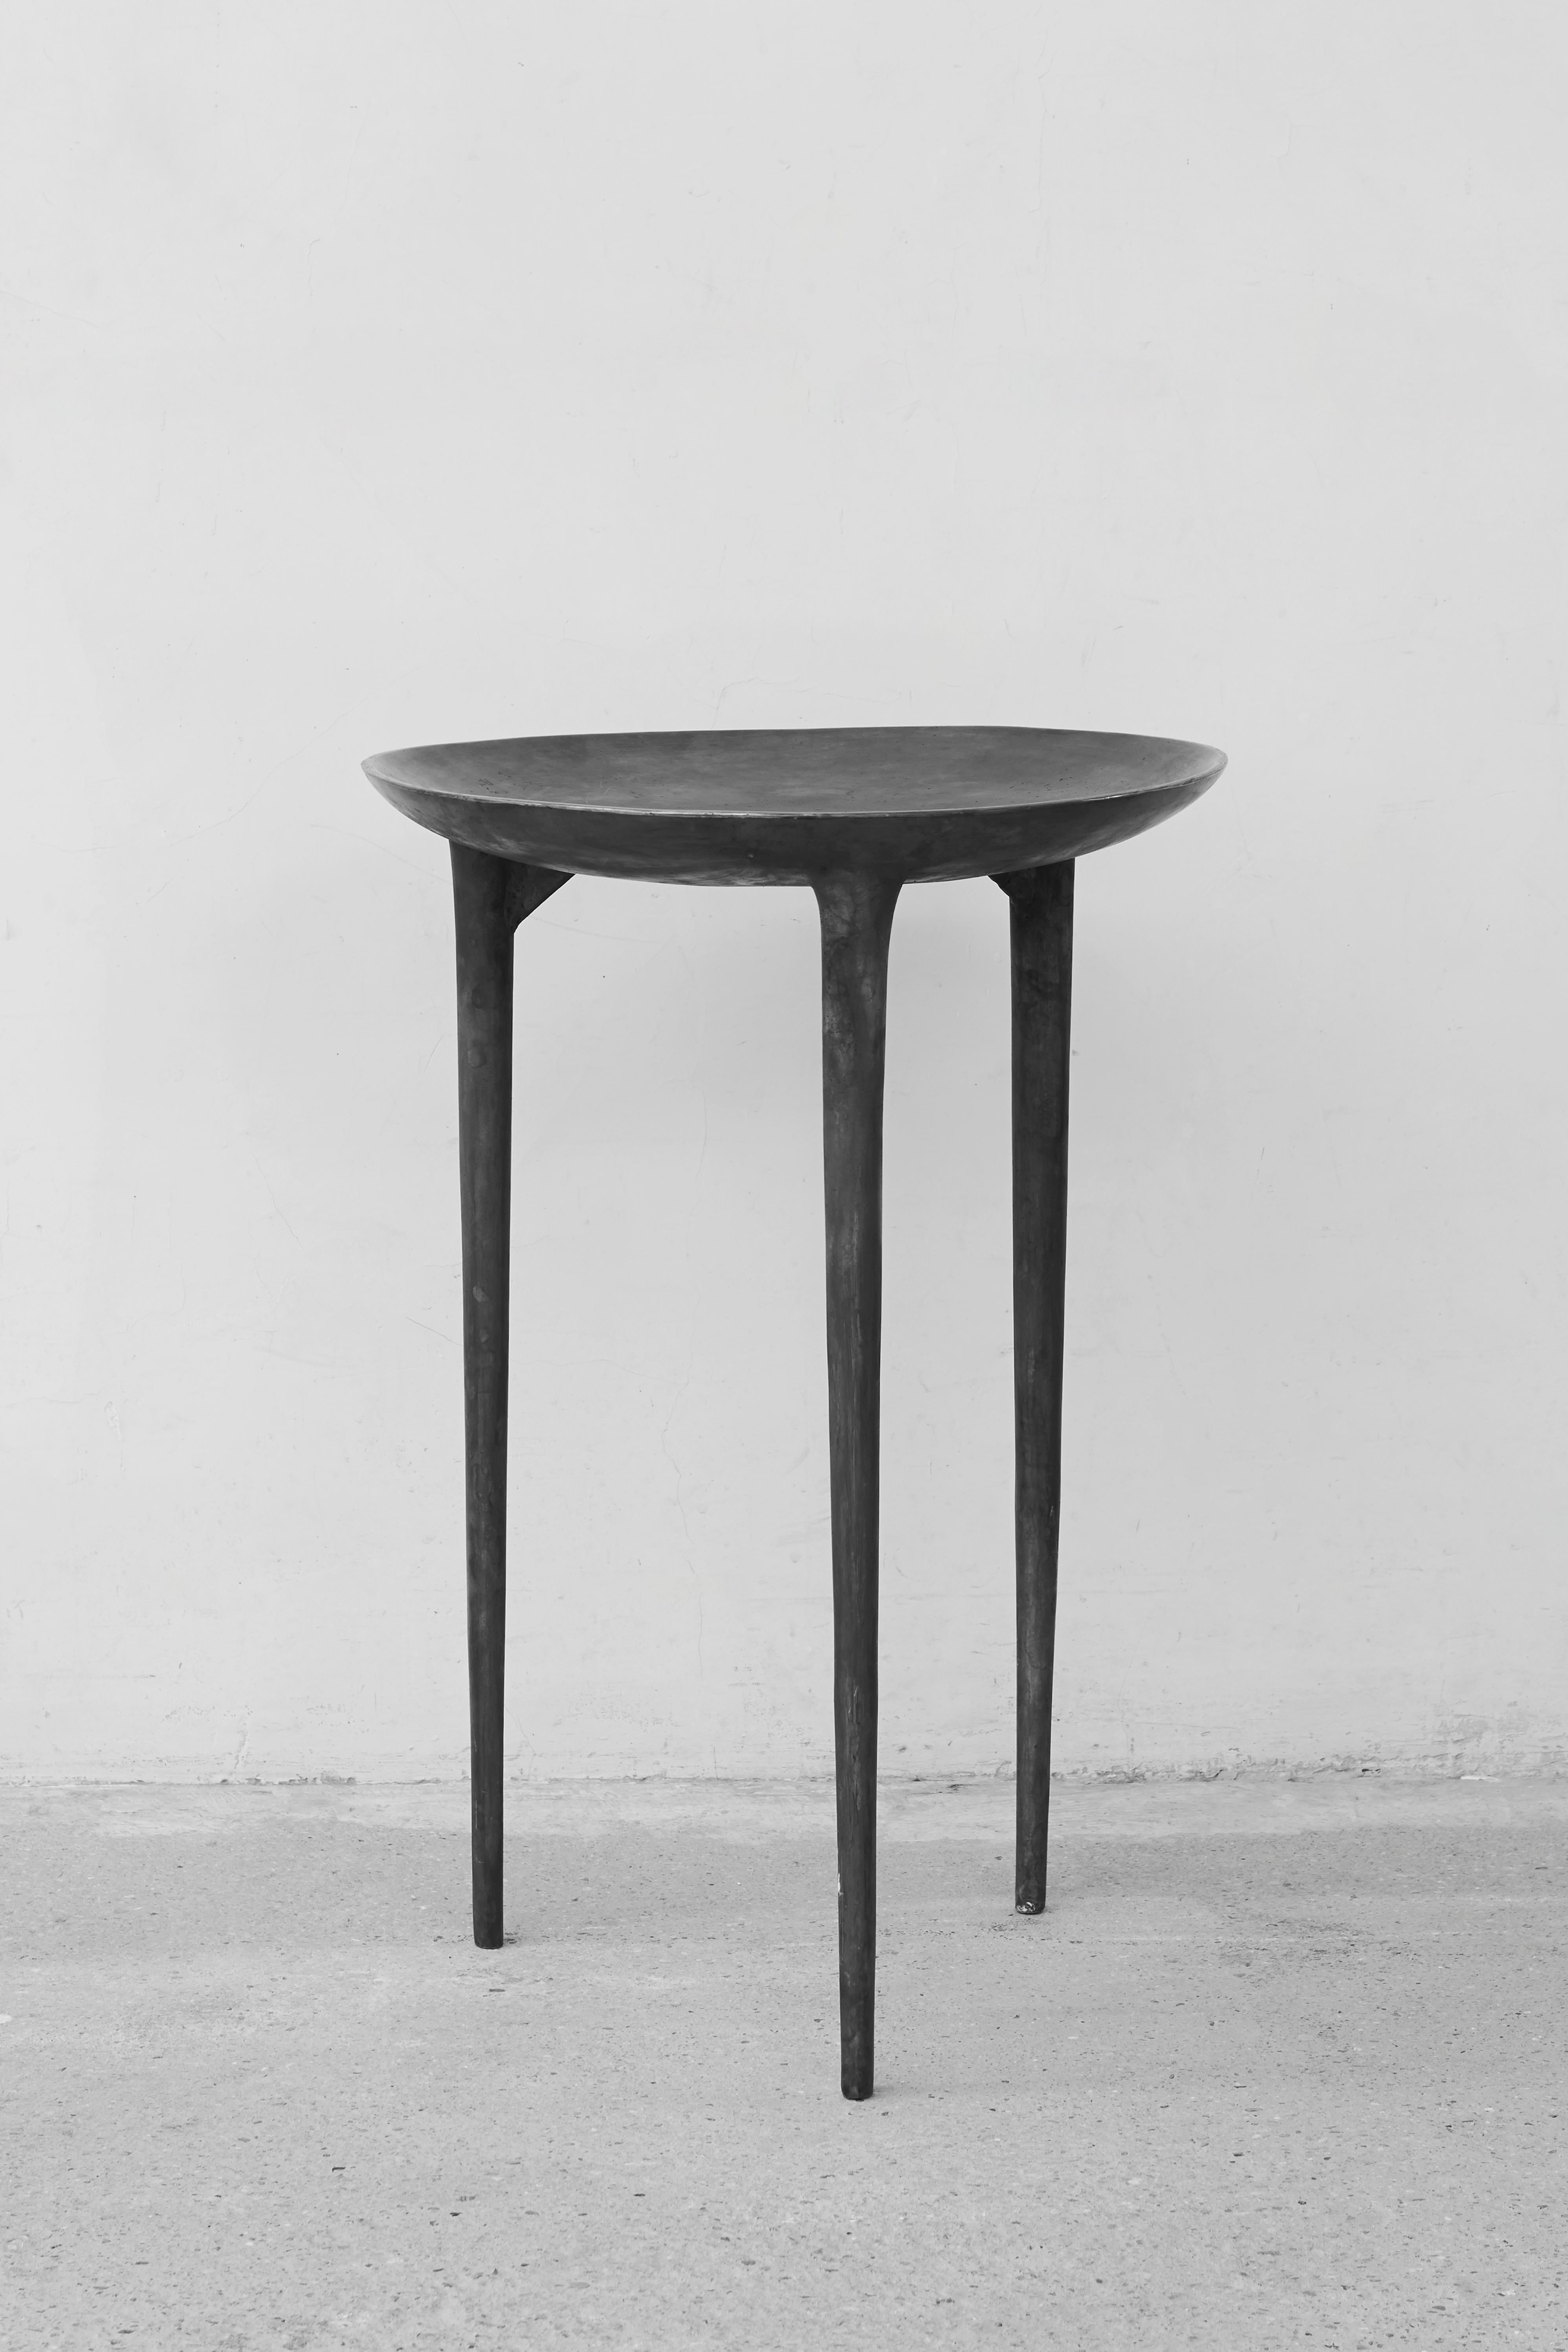 Tall brazier table by Rick Owens
2007
Dimensions: L 42 x W 42 x H 59 cm
Materials: Bronze
Weight: 25 kg

Available in Black finish or Nitrate (Dark Brown) finish, please contact us.

Rick Owens is a California-born fashion and furniture has